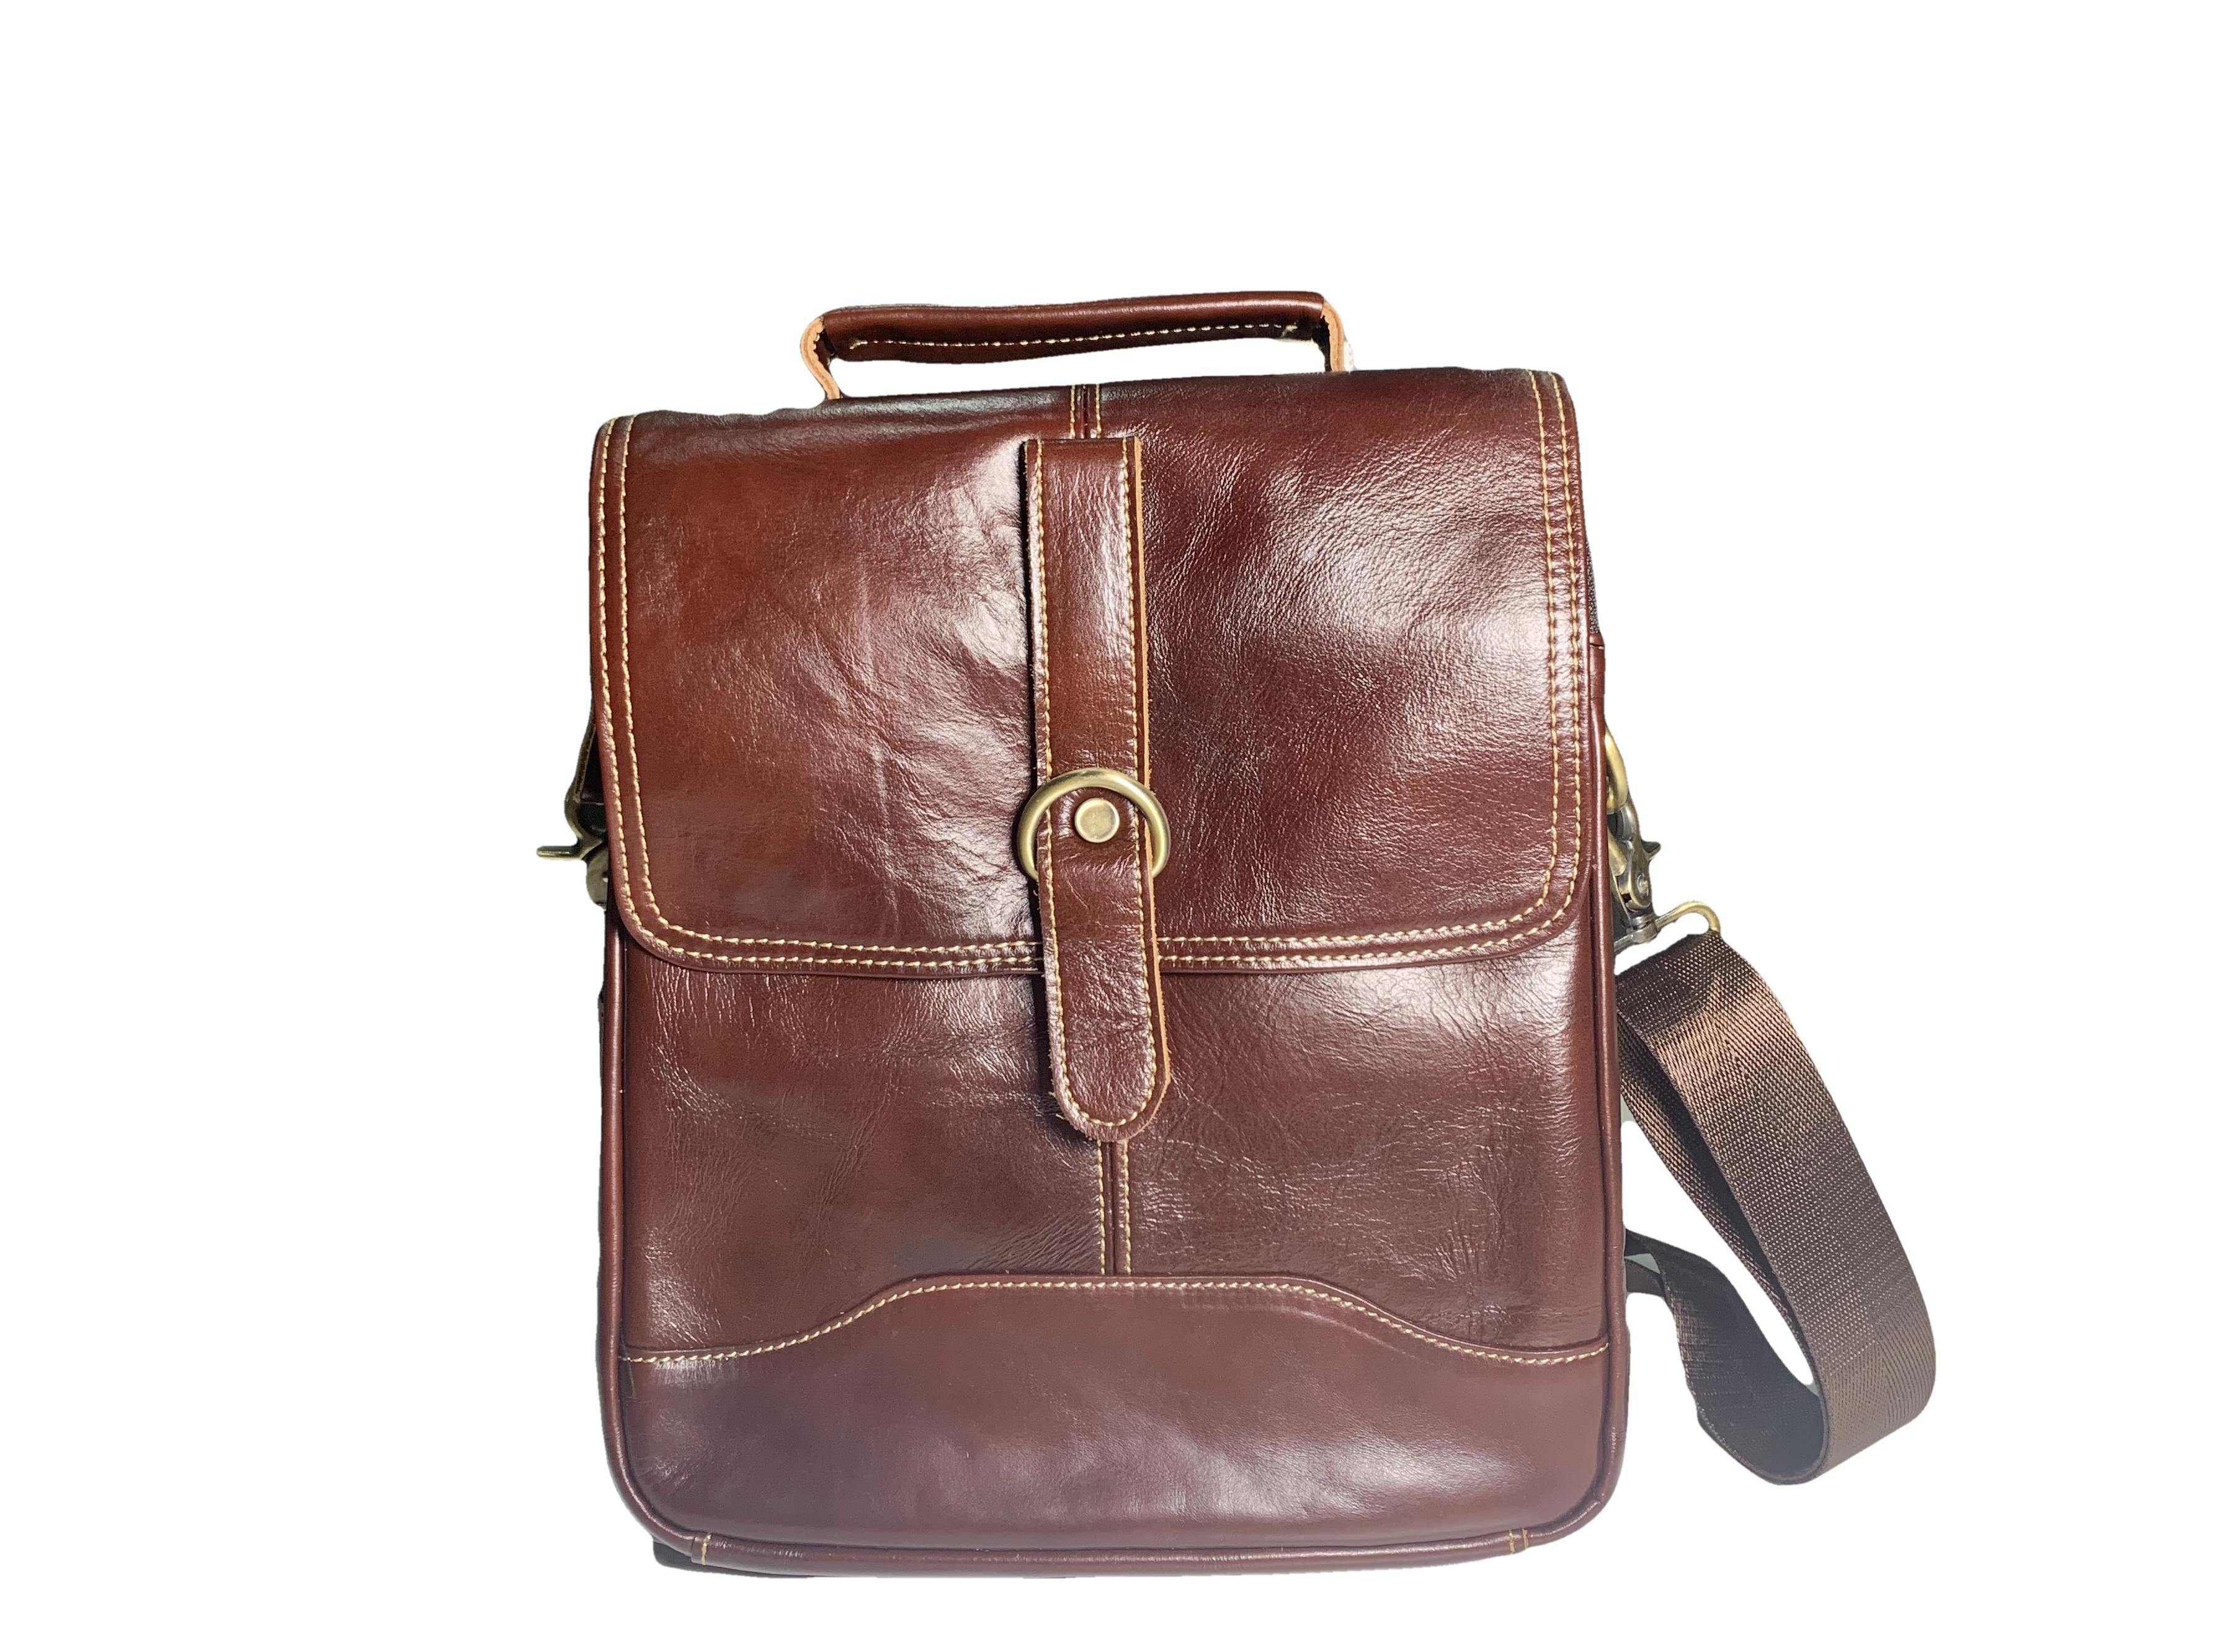 Discovery X Messenger Dark Brown Leather Travel Bag | Ejad